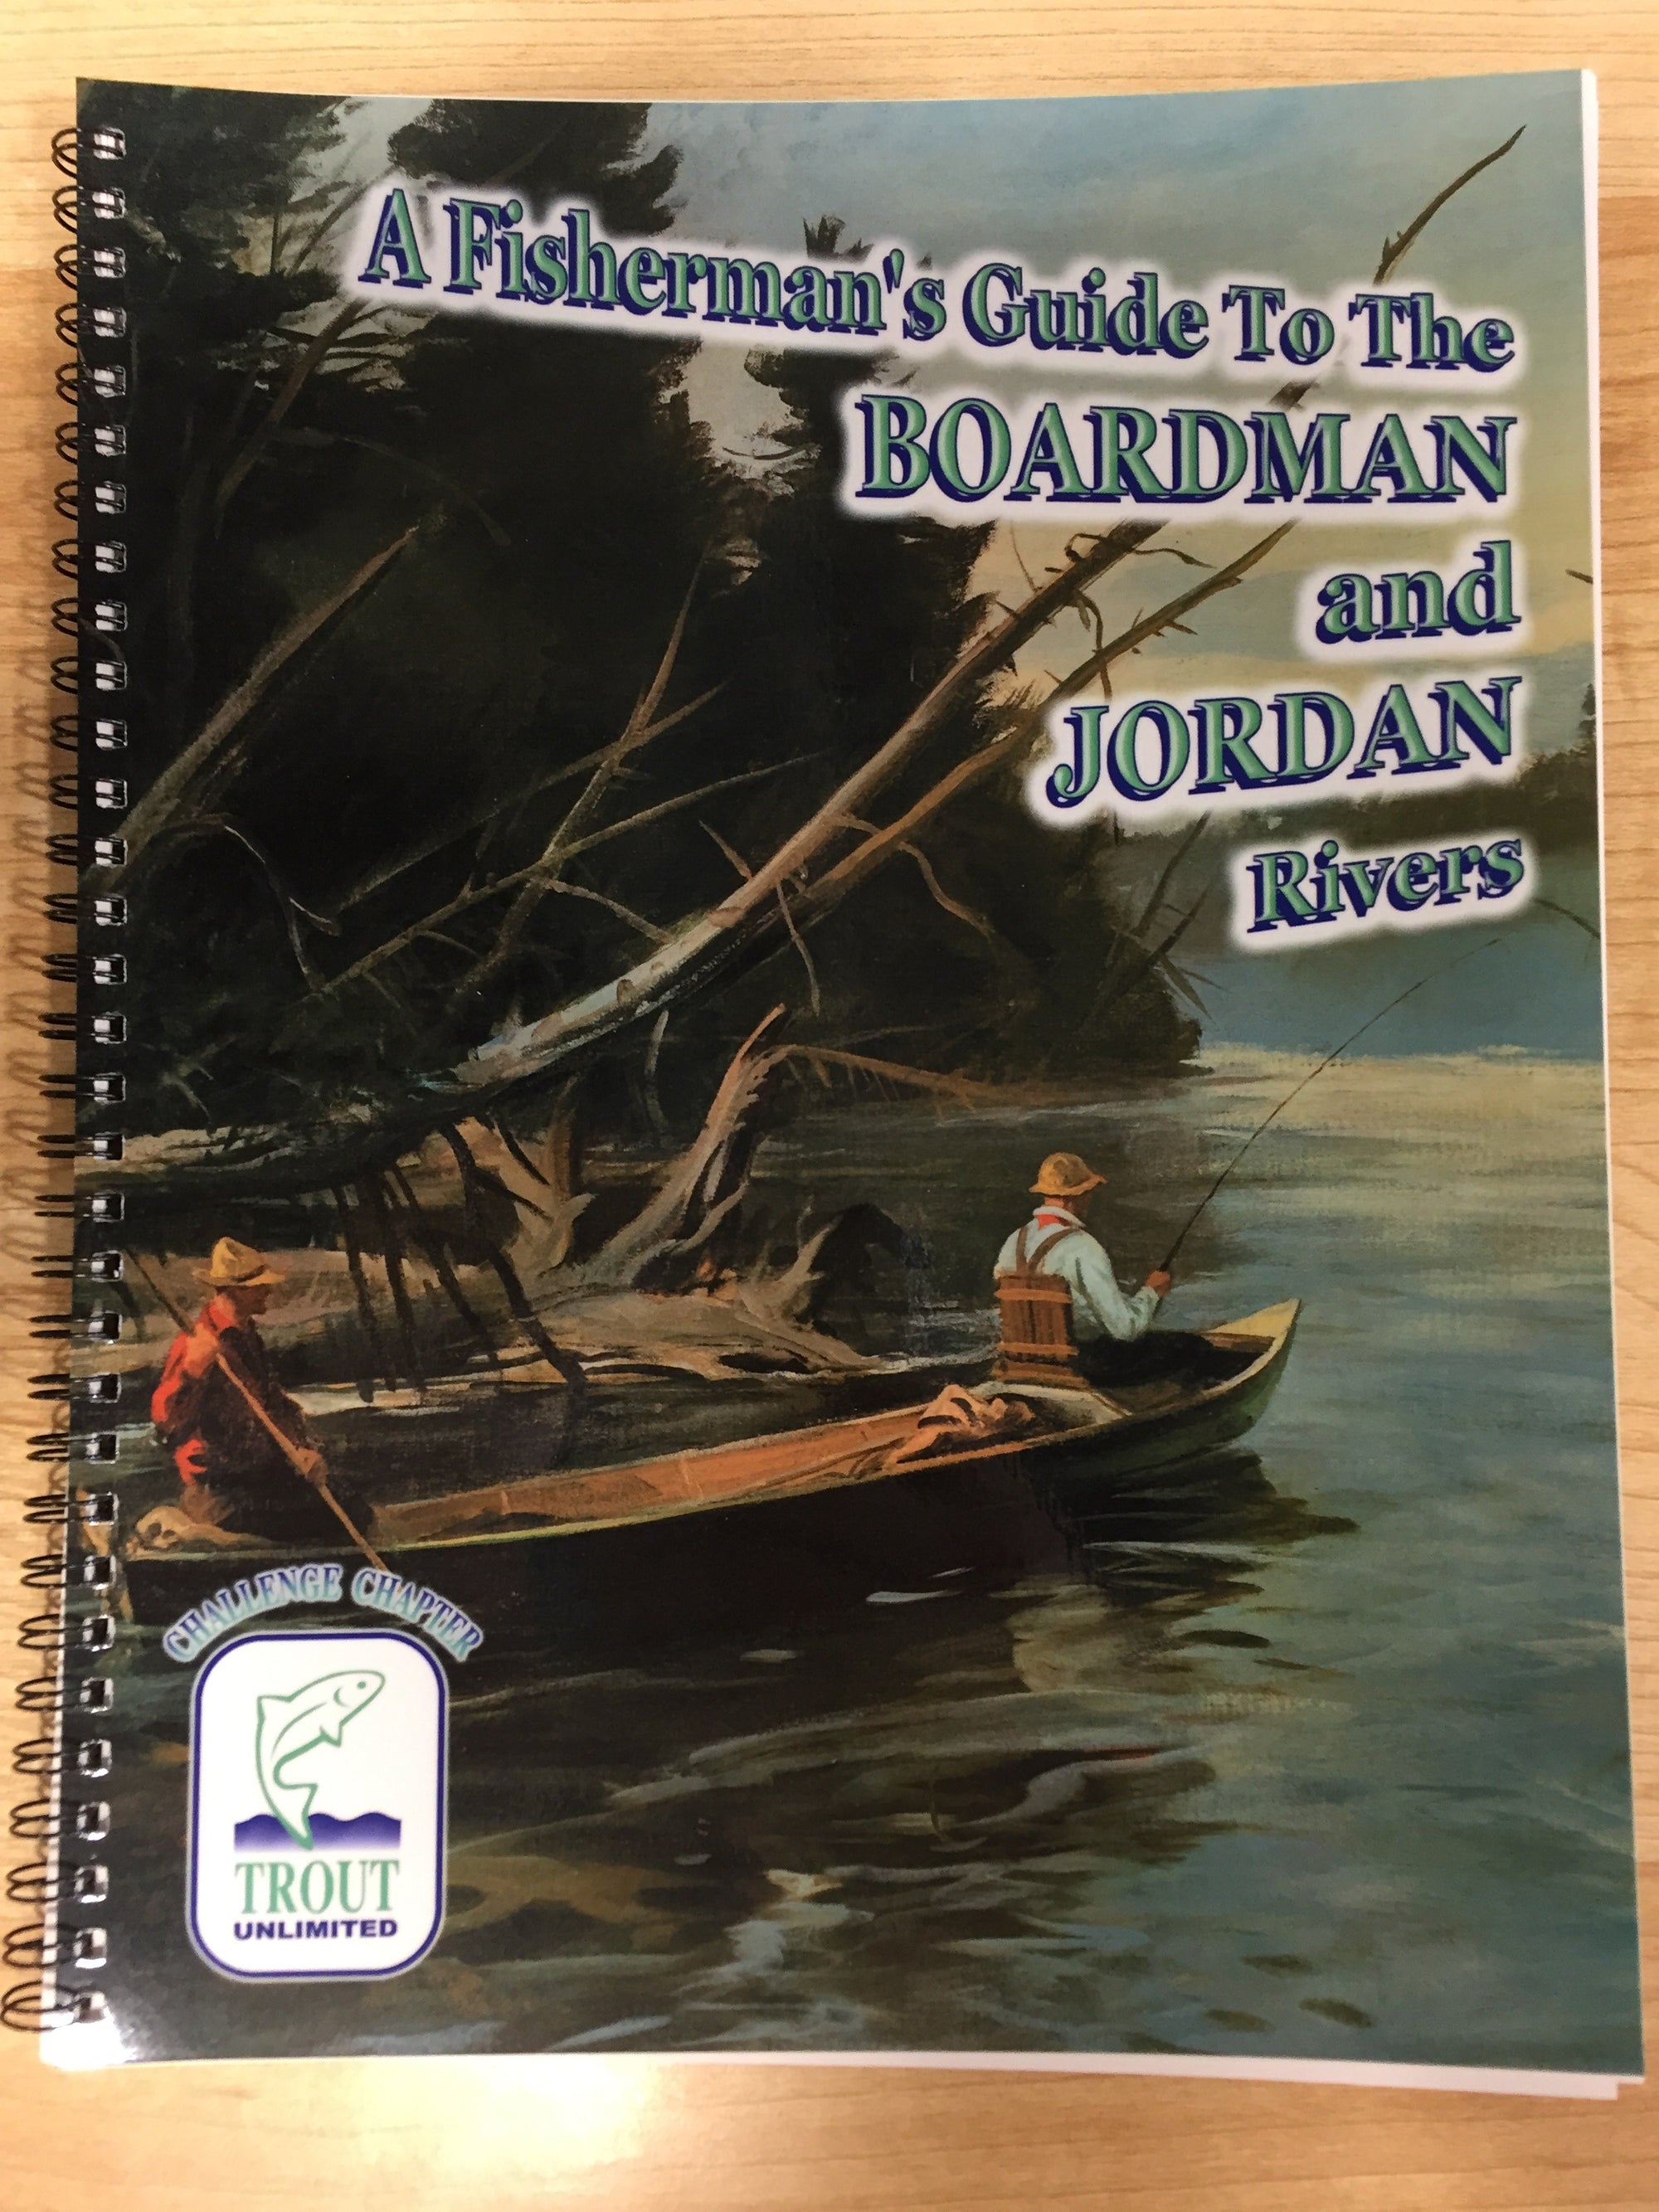 A Fisherman's Guide to the Boardman and Jordan Rivers